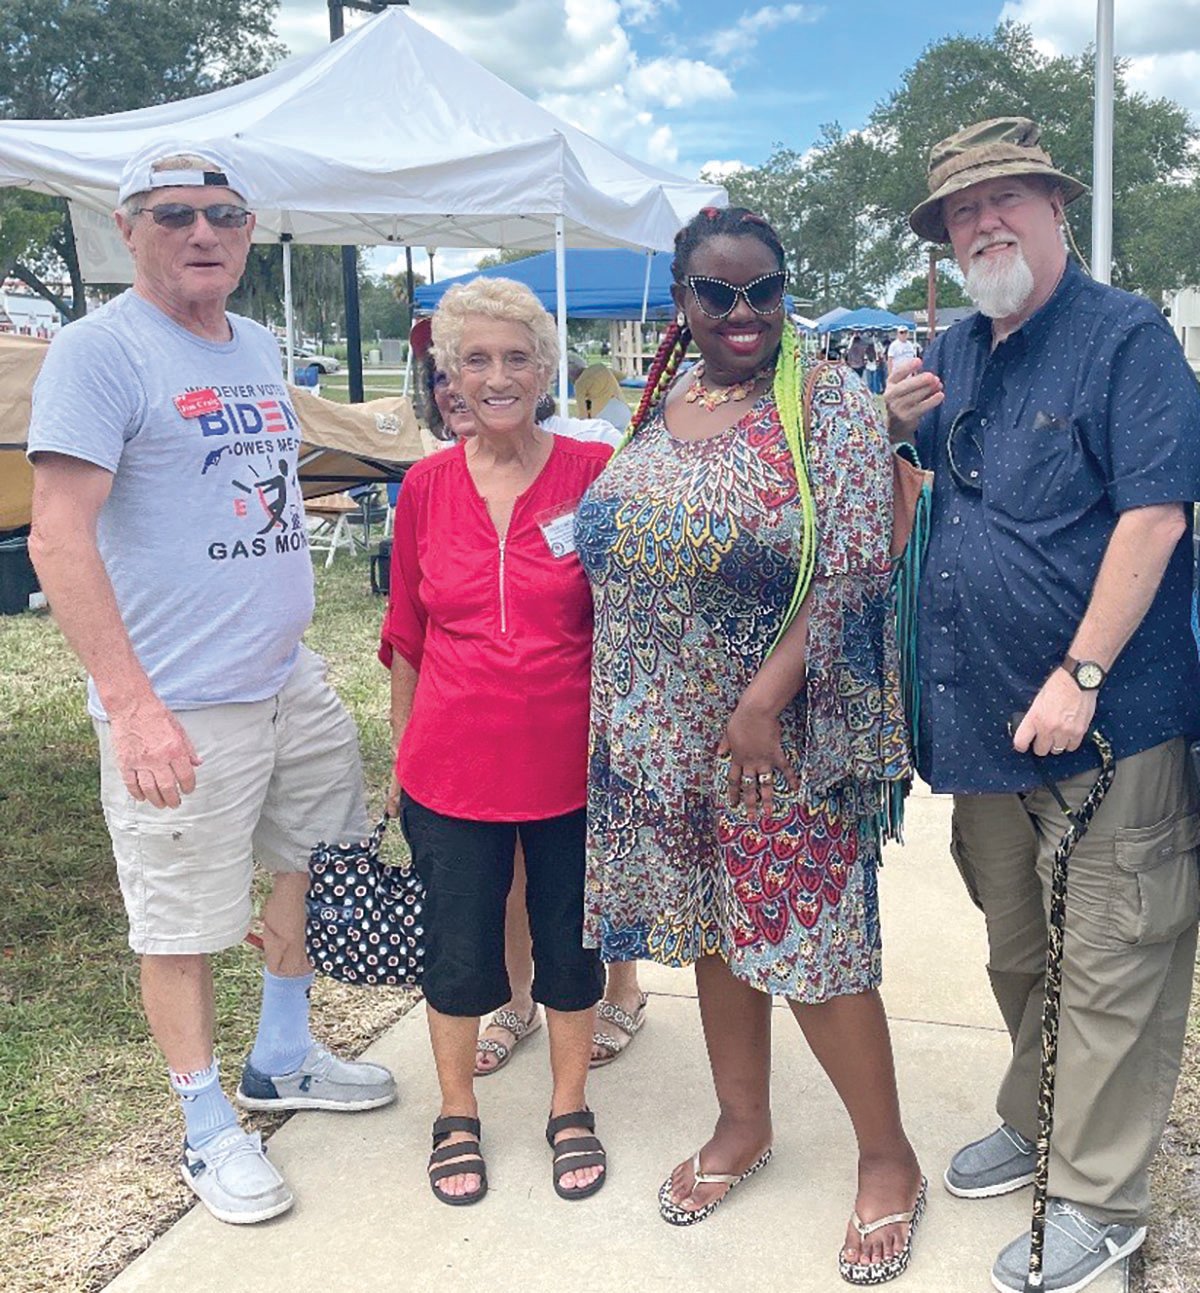 Club President Alicia LaChance with friends and volunteer Raymond Brooks (right).